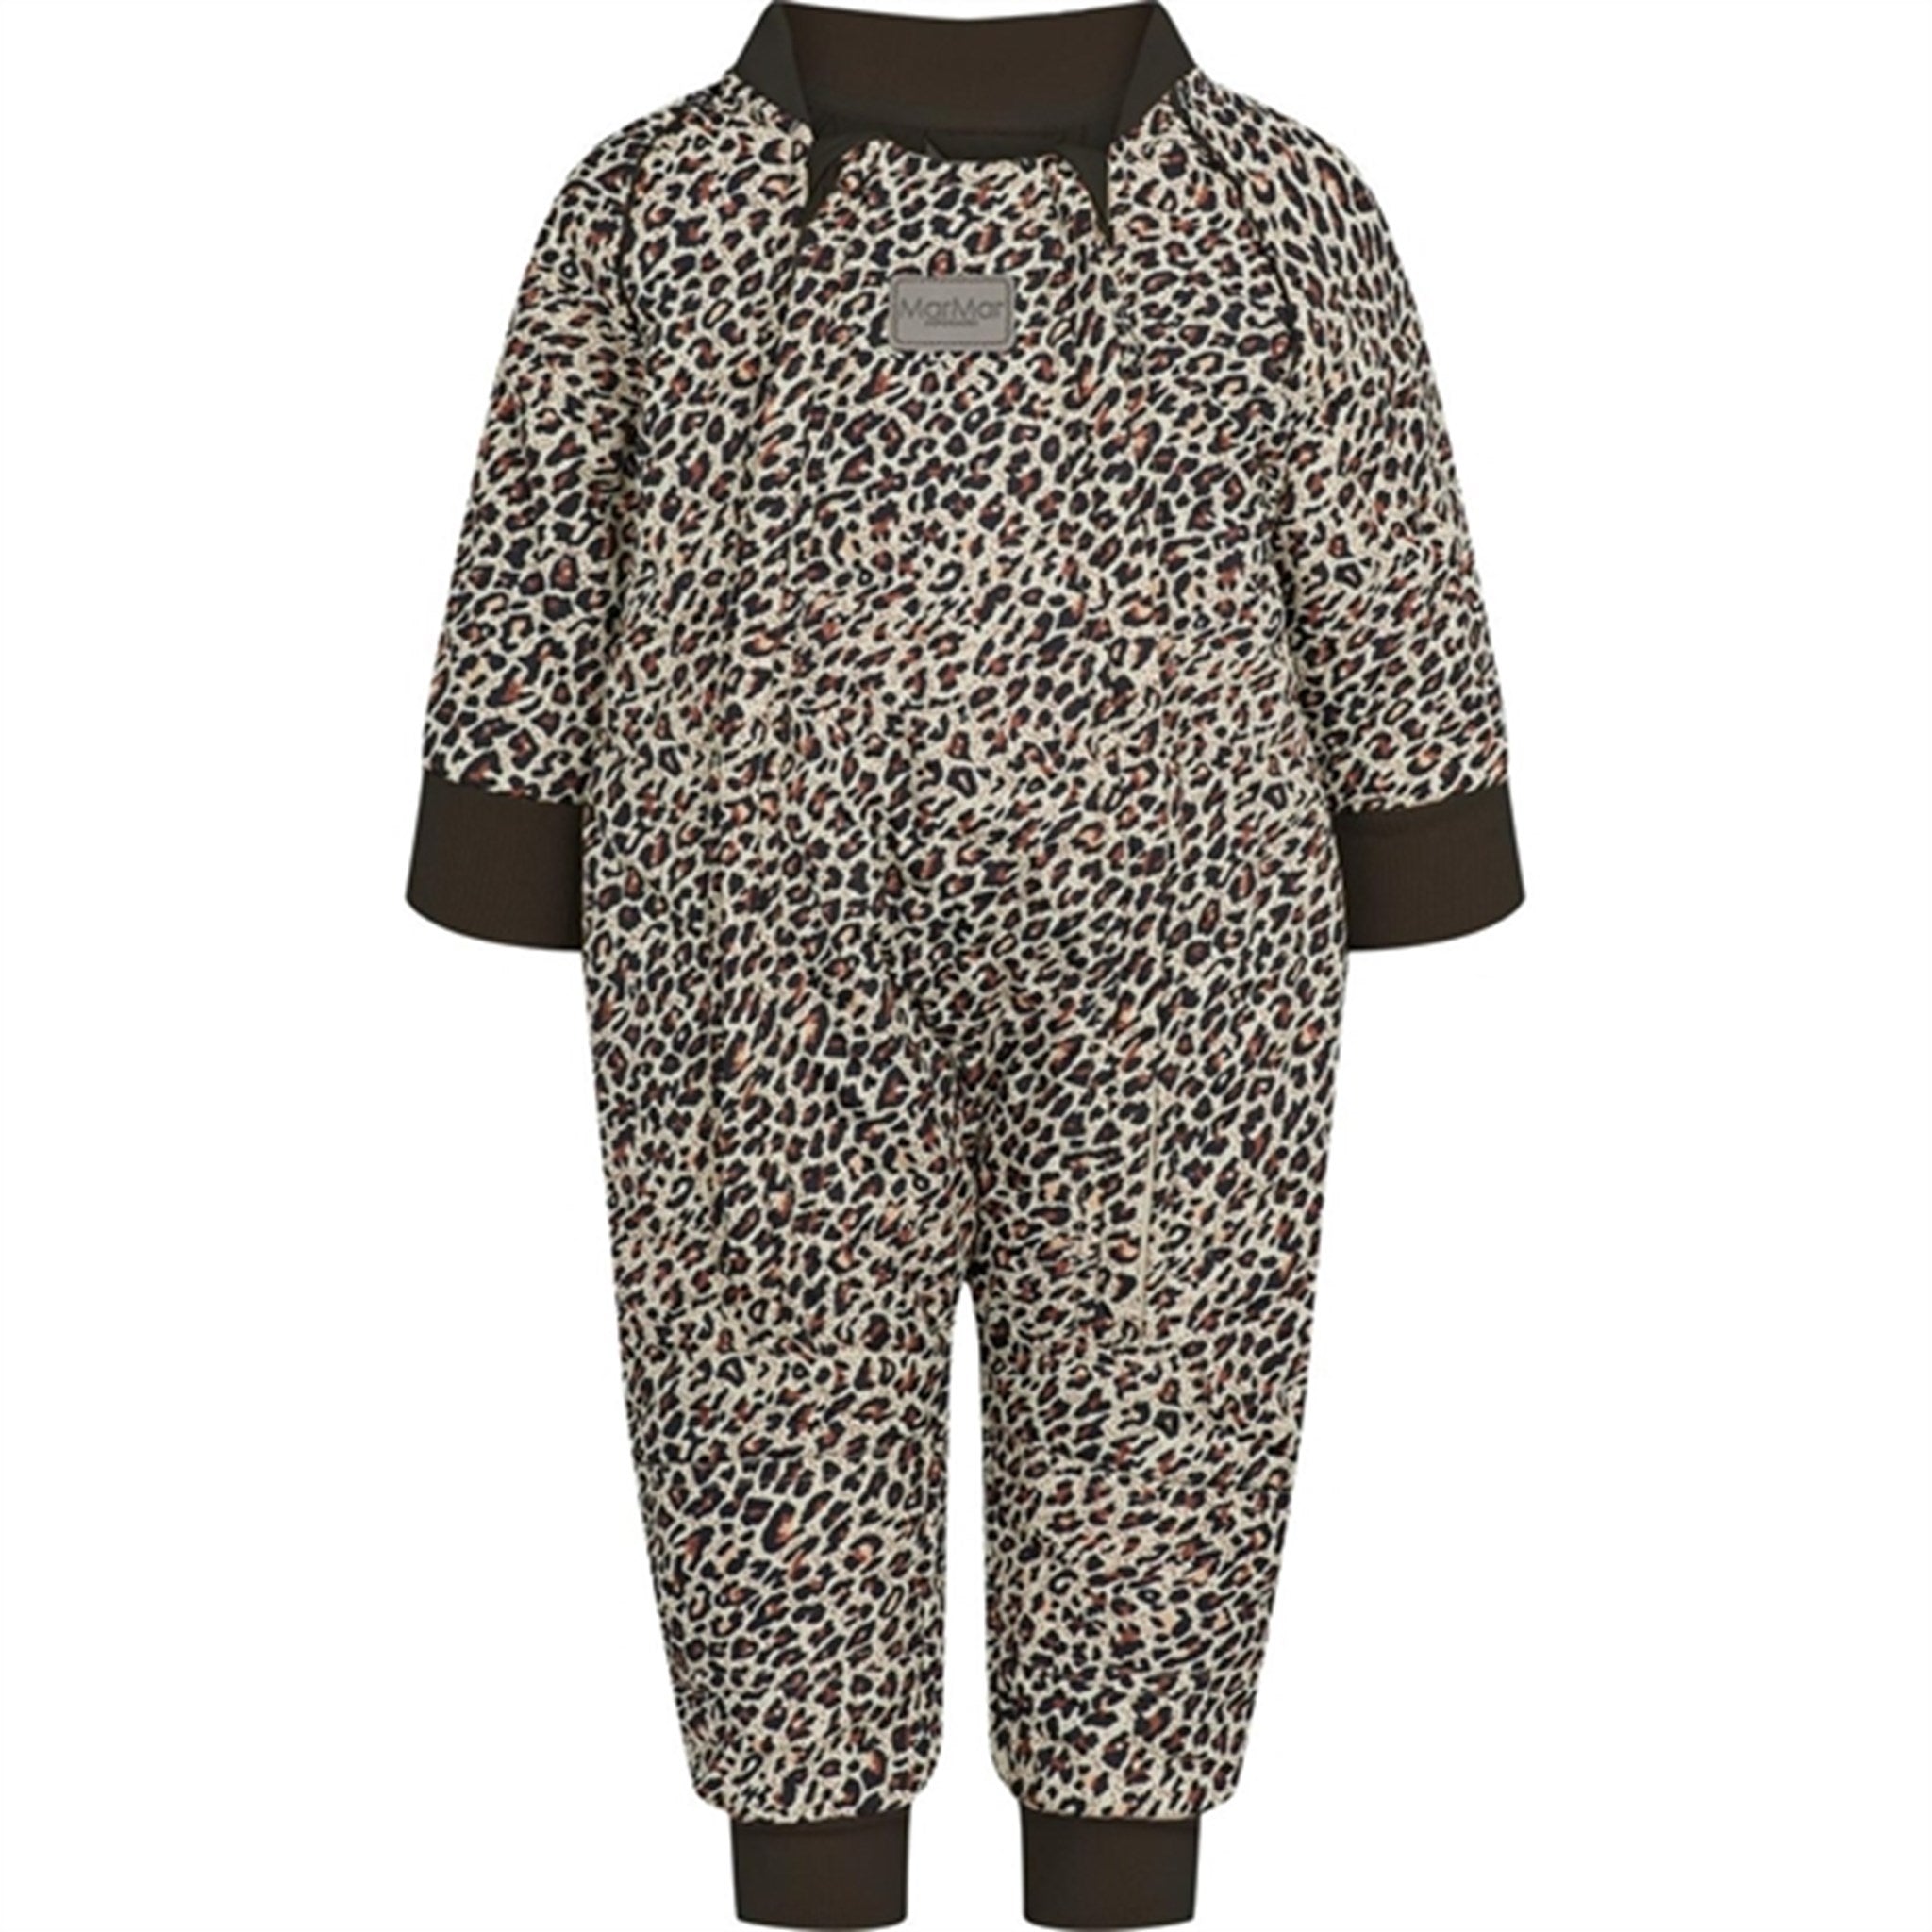 MarMar Leopard Oza Thermo Suit